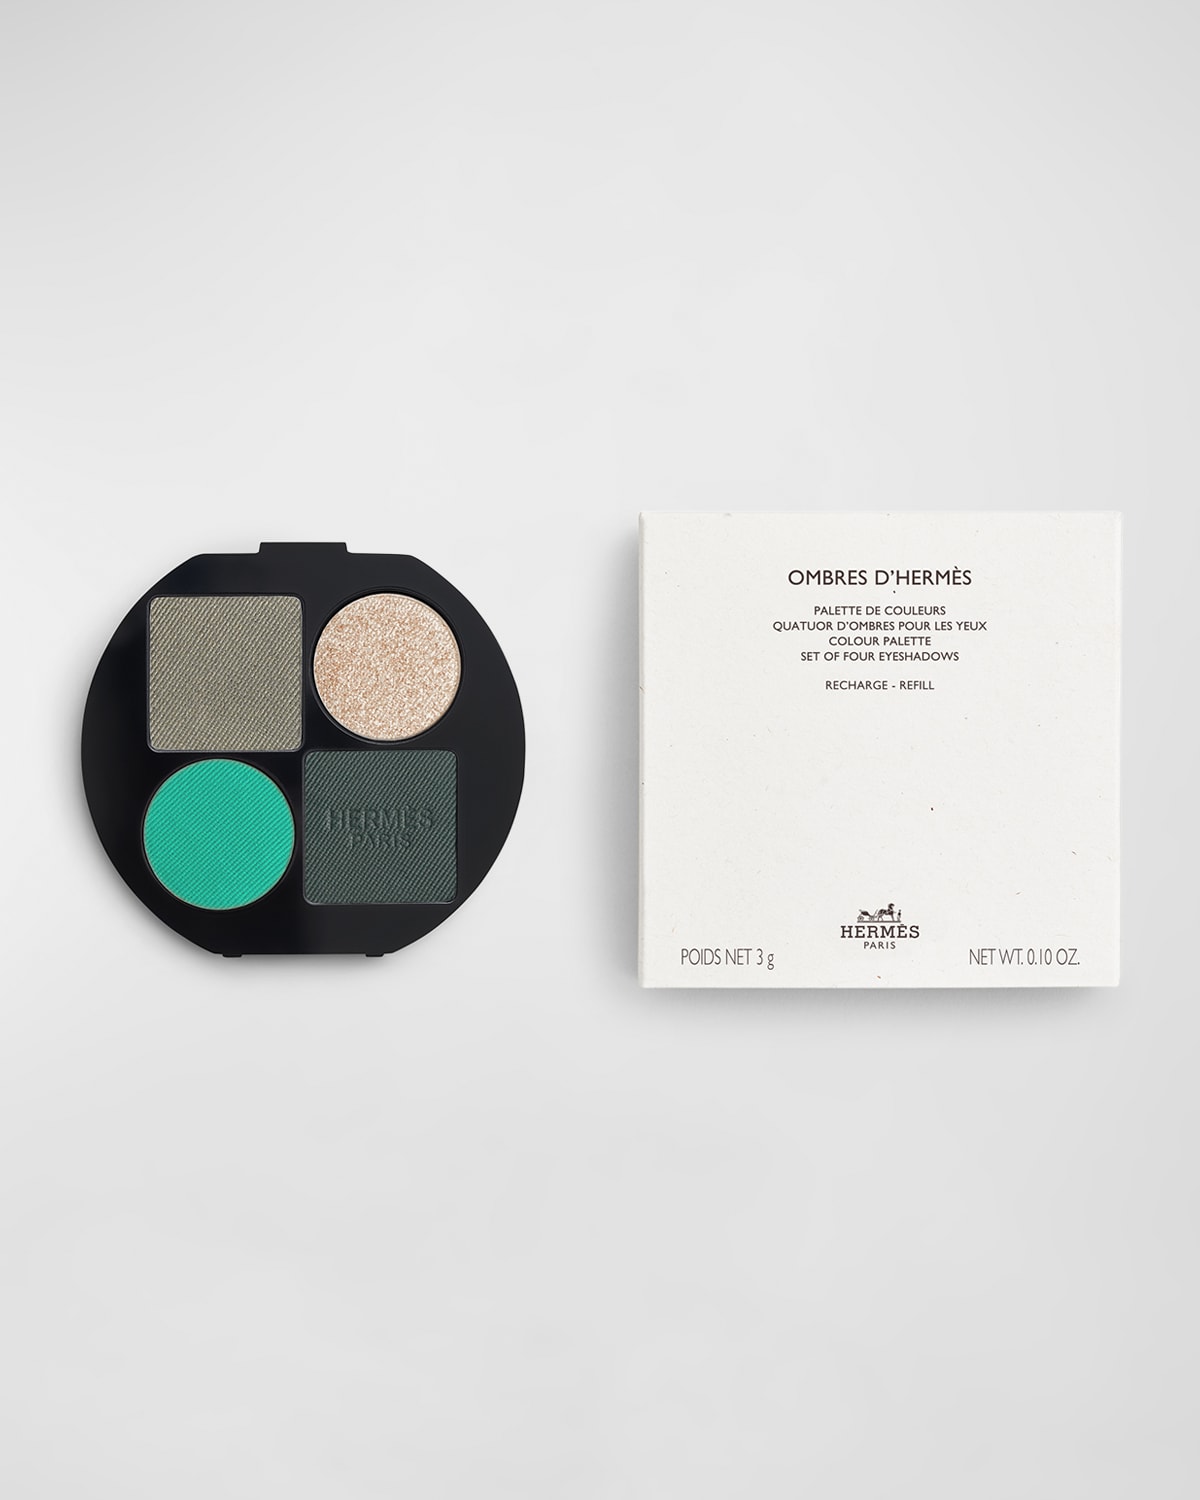 Ombres d'Hermes Eyeshadow Refill